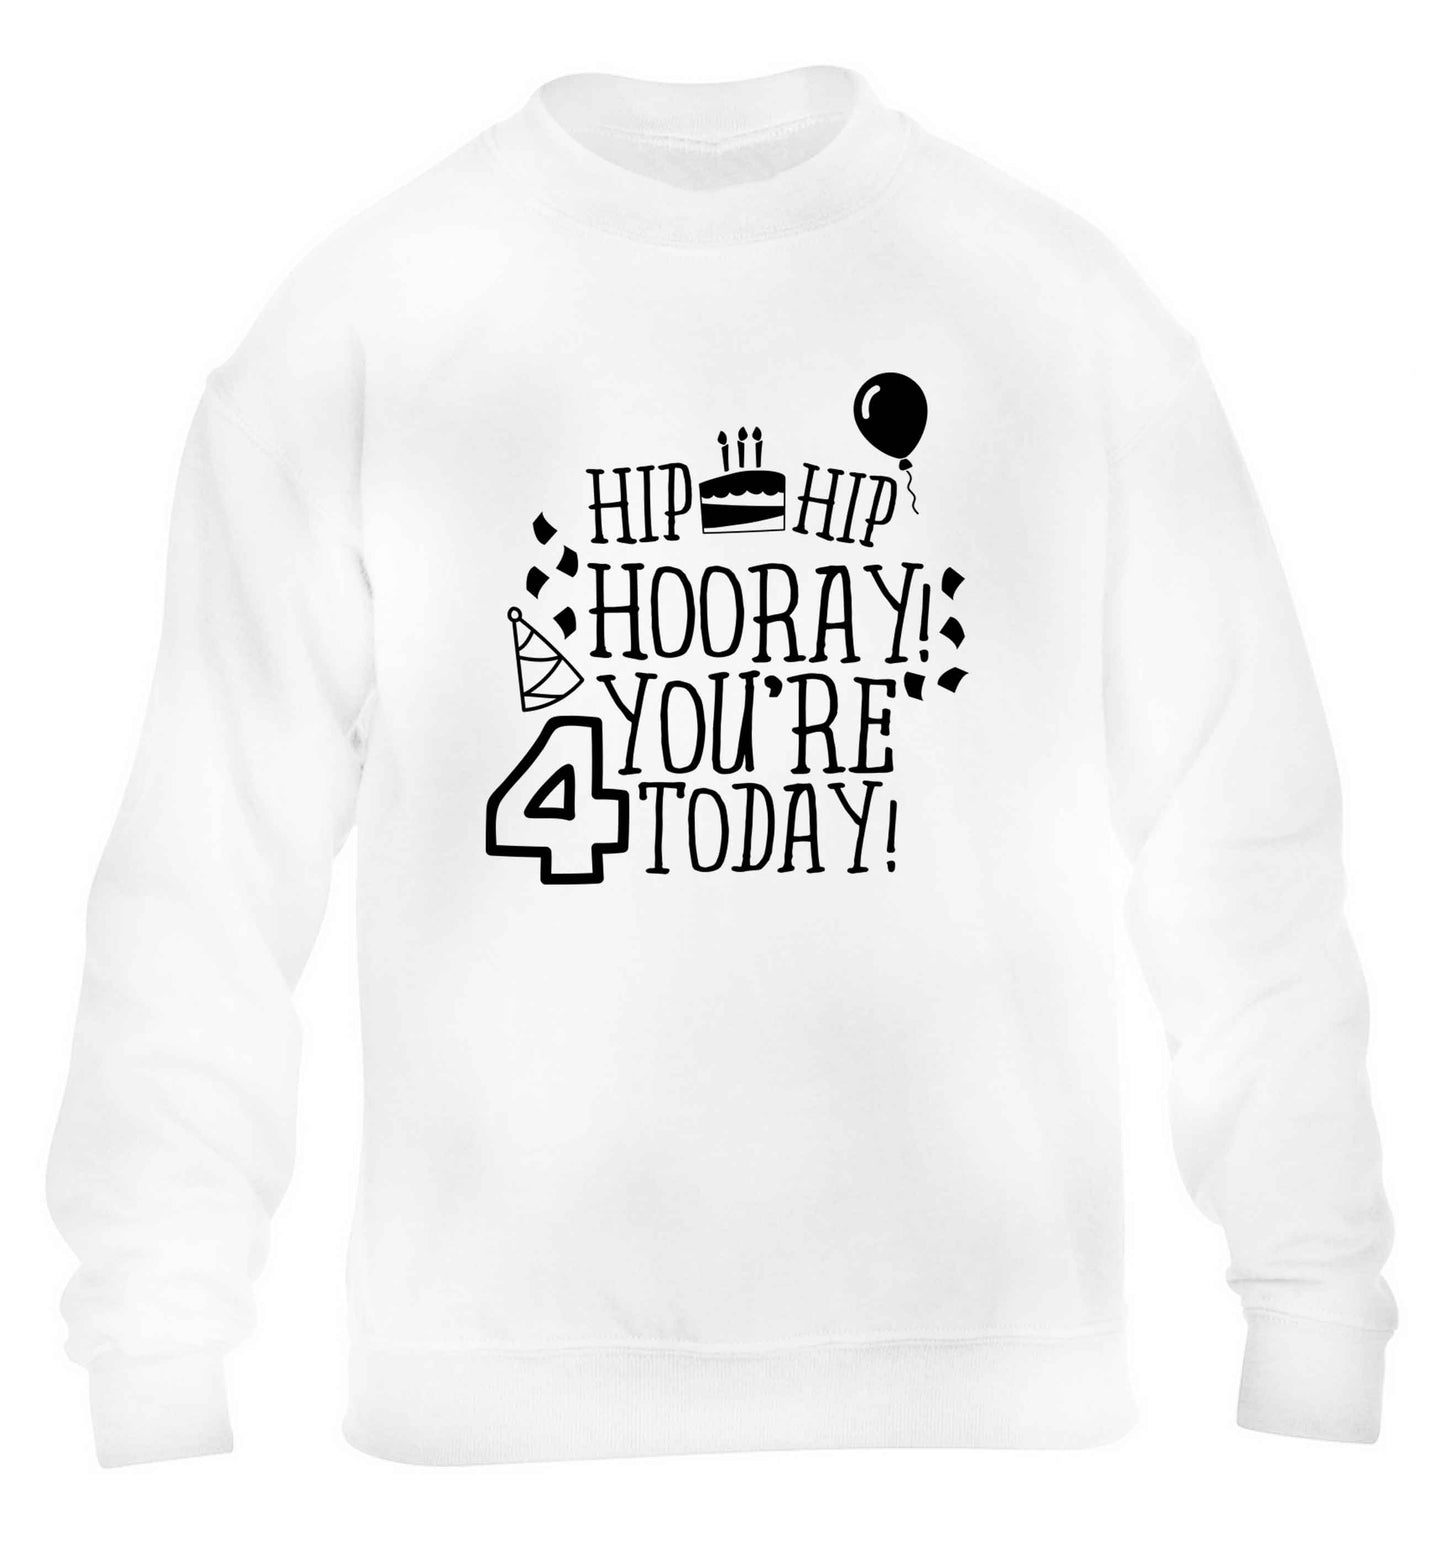 Hip hip hooray you're four today!children's white sweater 12-13 Years